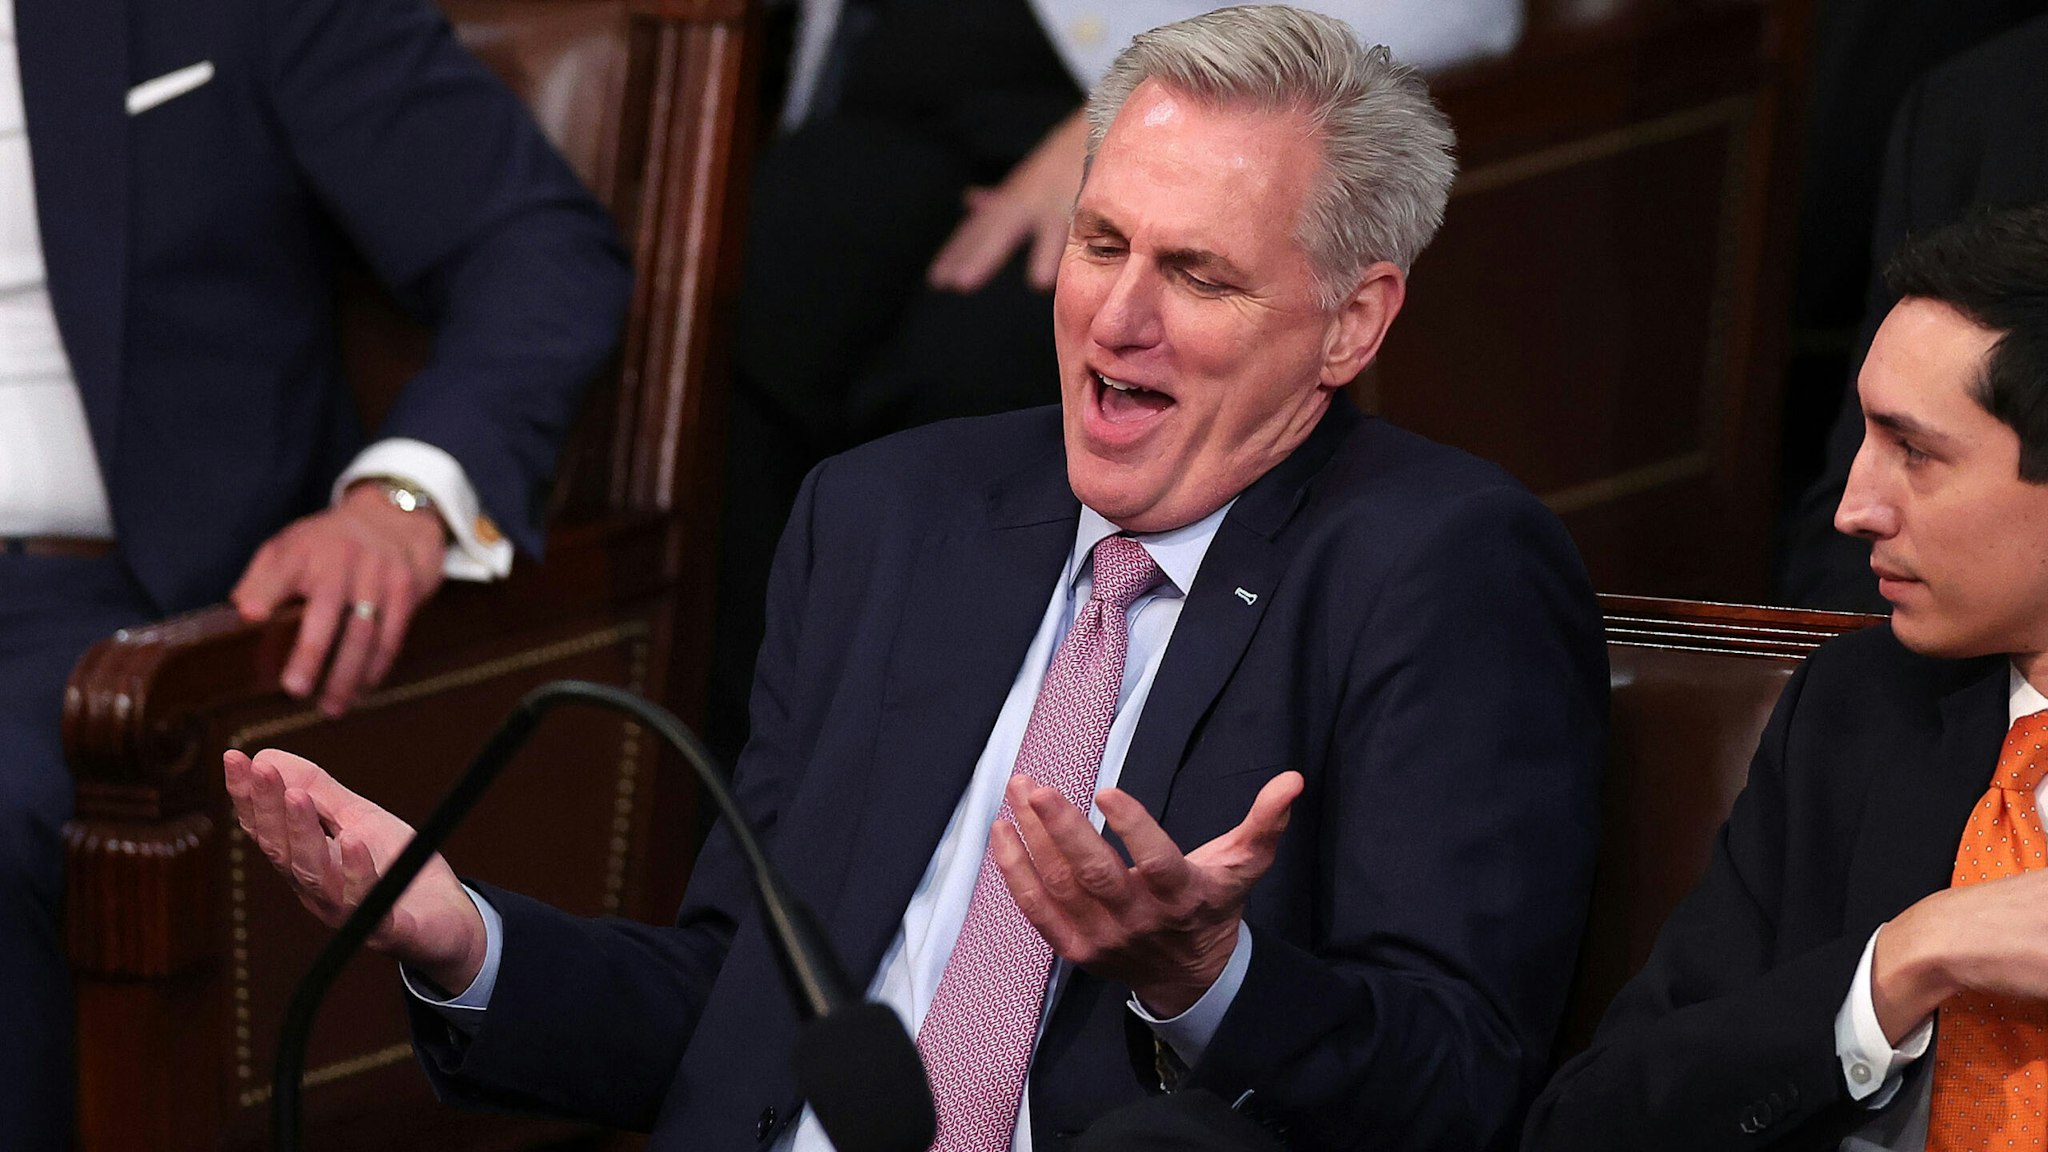 WASHINGTON, DC - JANUARY 06: U.S. House Republican Leader Kevin McCarthy (R-CA) reacts in the House Chamber during the fourth day of elections for Speaker of the House at the U.S. Capitol Building on January 06, 2023 in Washington, DC. The House of Representatives is meeting to vote for the next Speaker after House Republican Leader Kevin McCarthy (R-CA) failed to earn more than 218 votes on several ballots; the first time in 100 years that the Speaker was not elected on the first ballot.